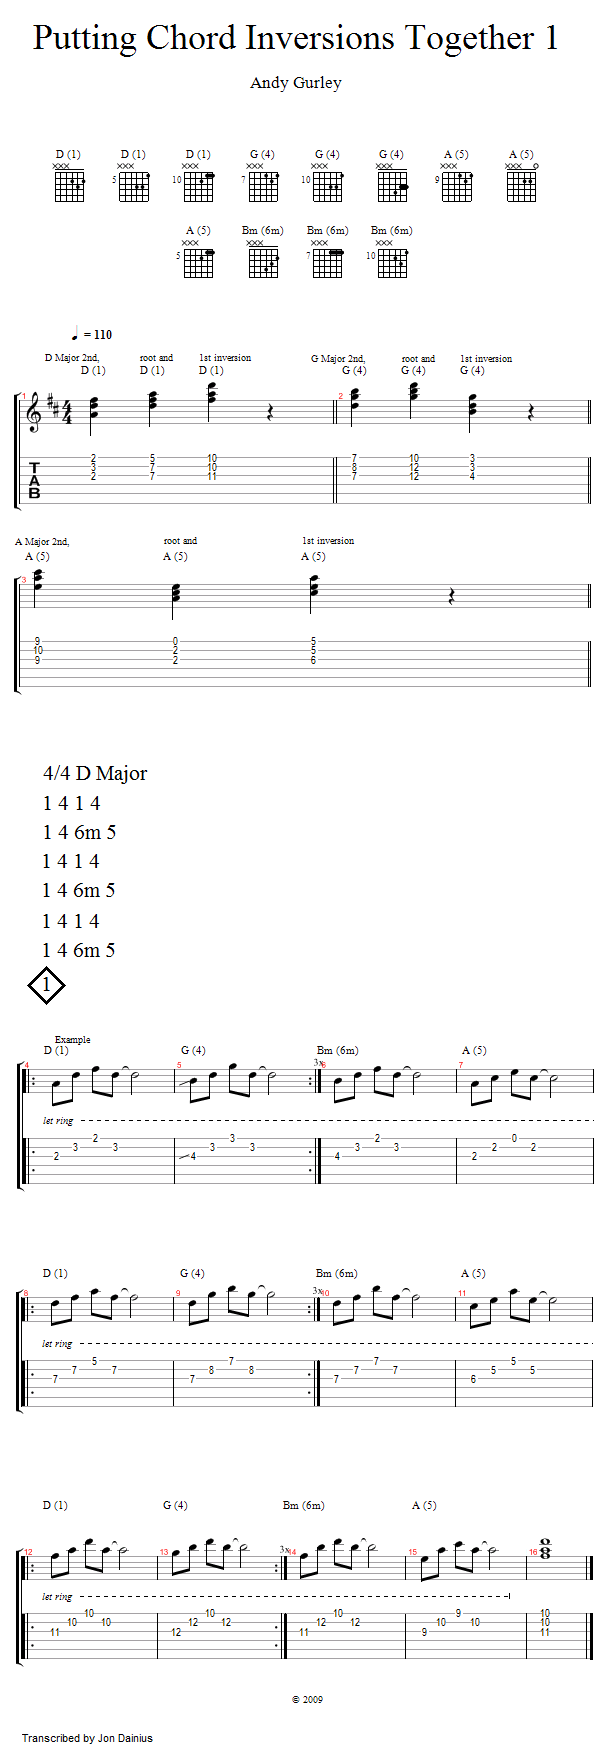 Putting Chord Inversions Together 1 song notation